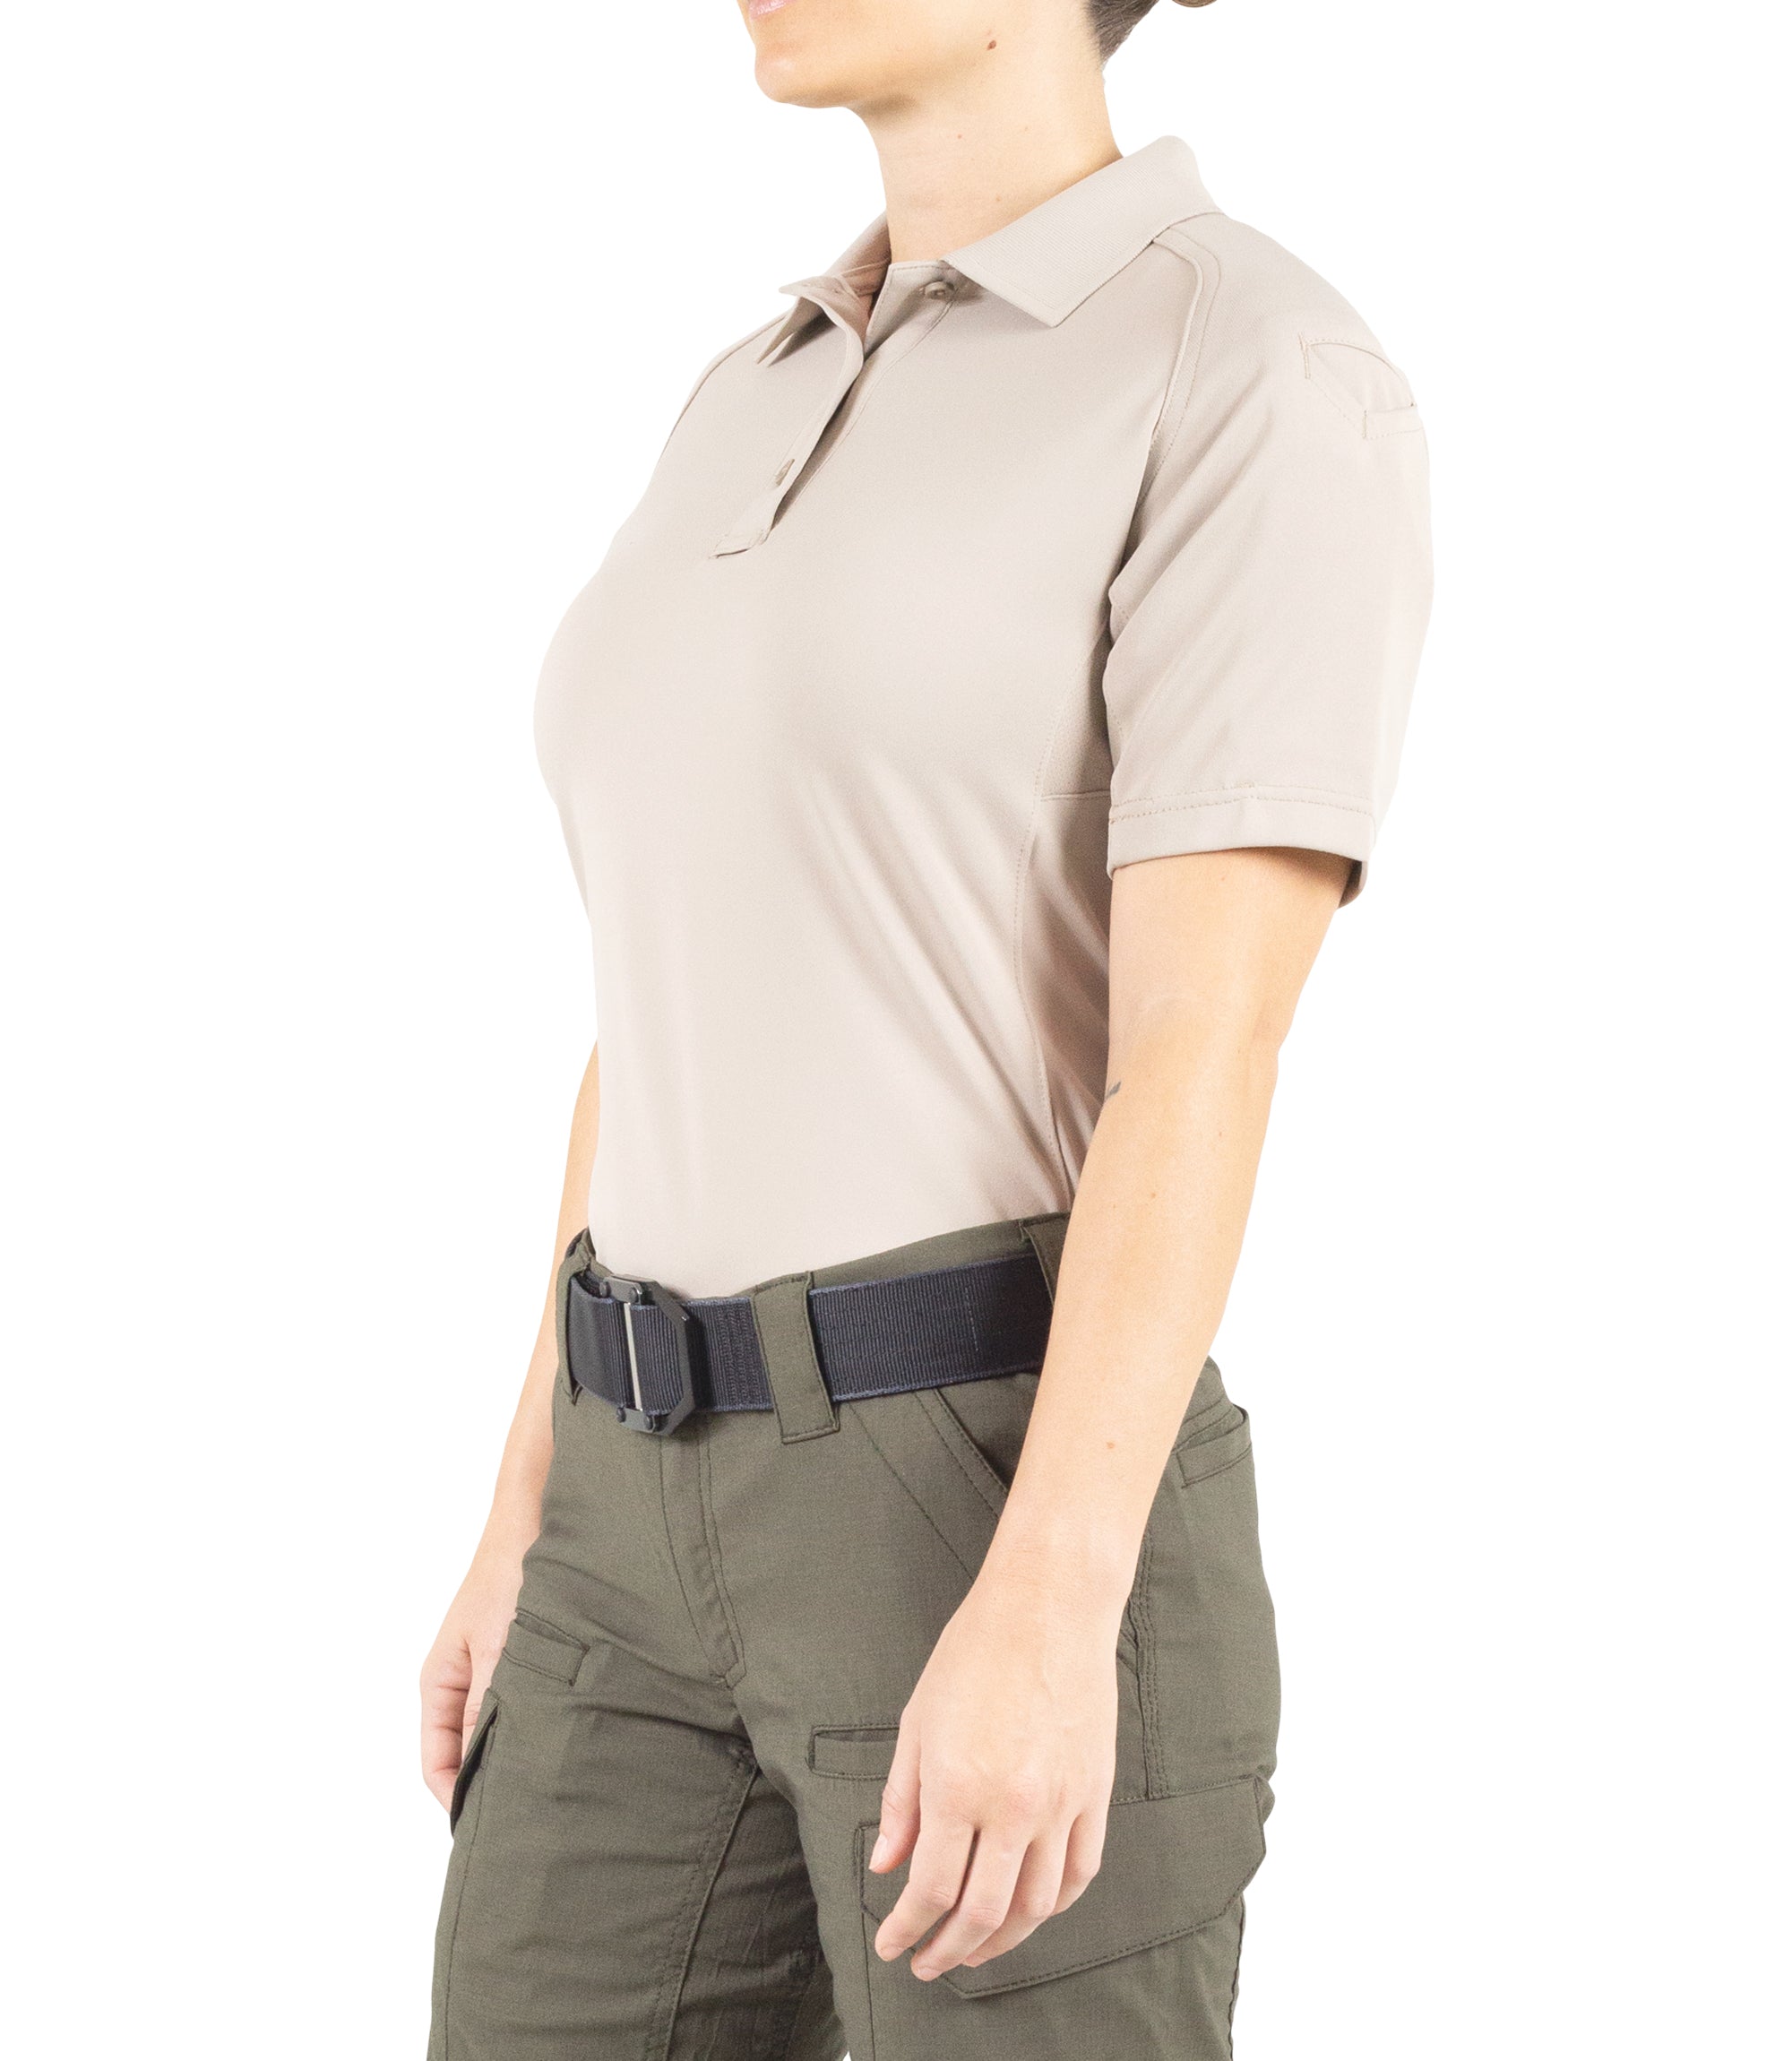 First Tactical Women's Performance Short Sleeve Polo